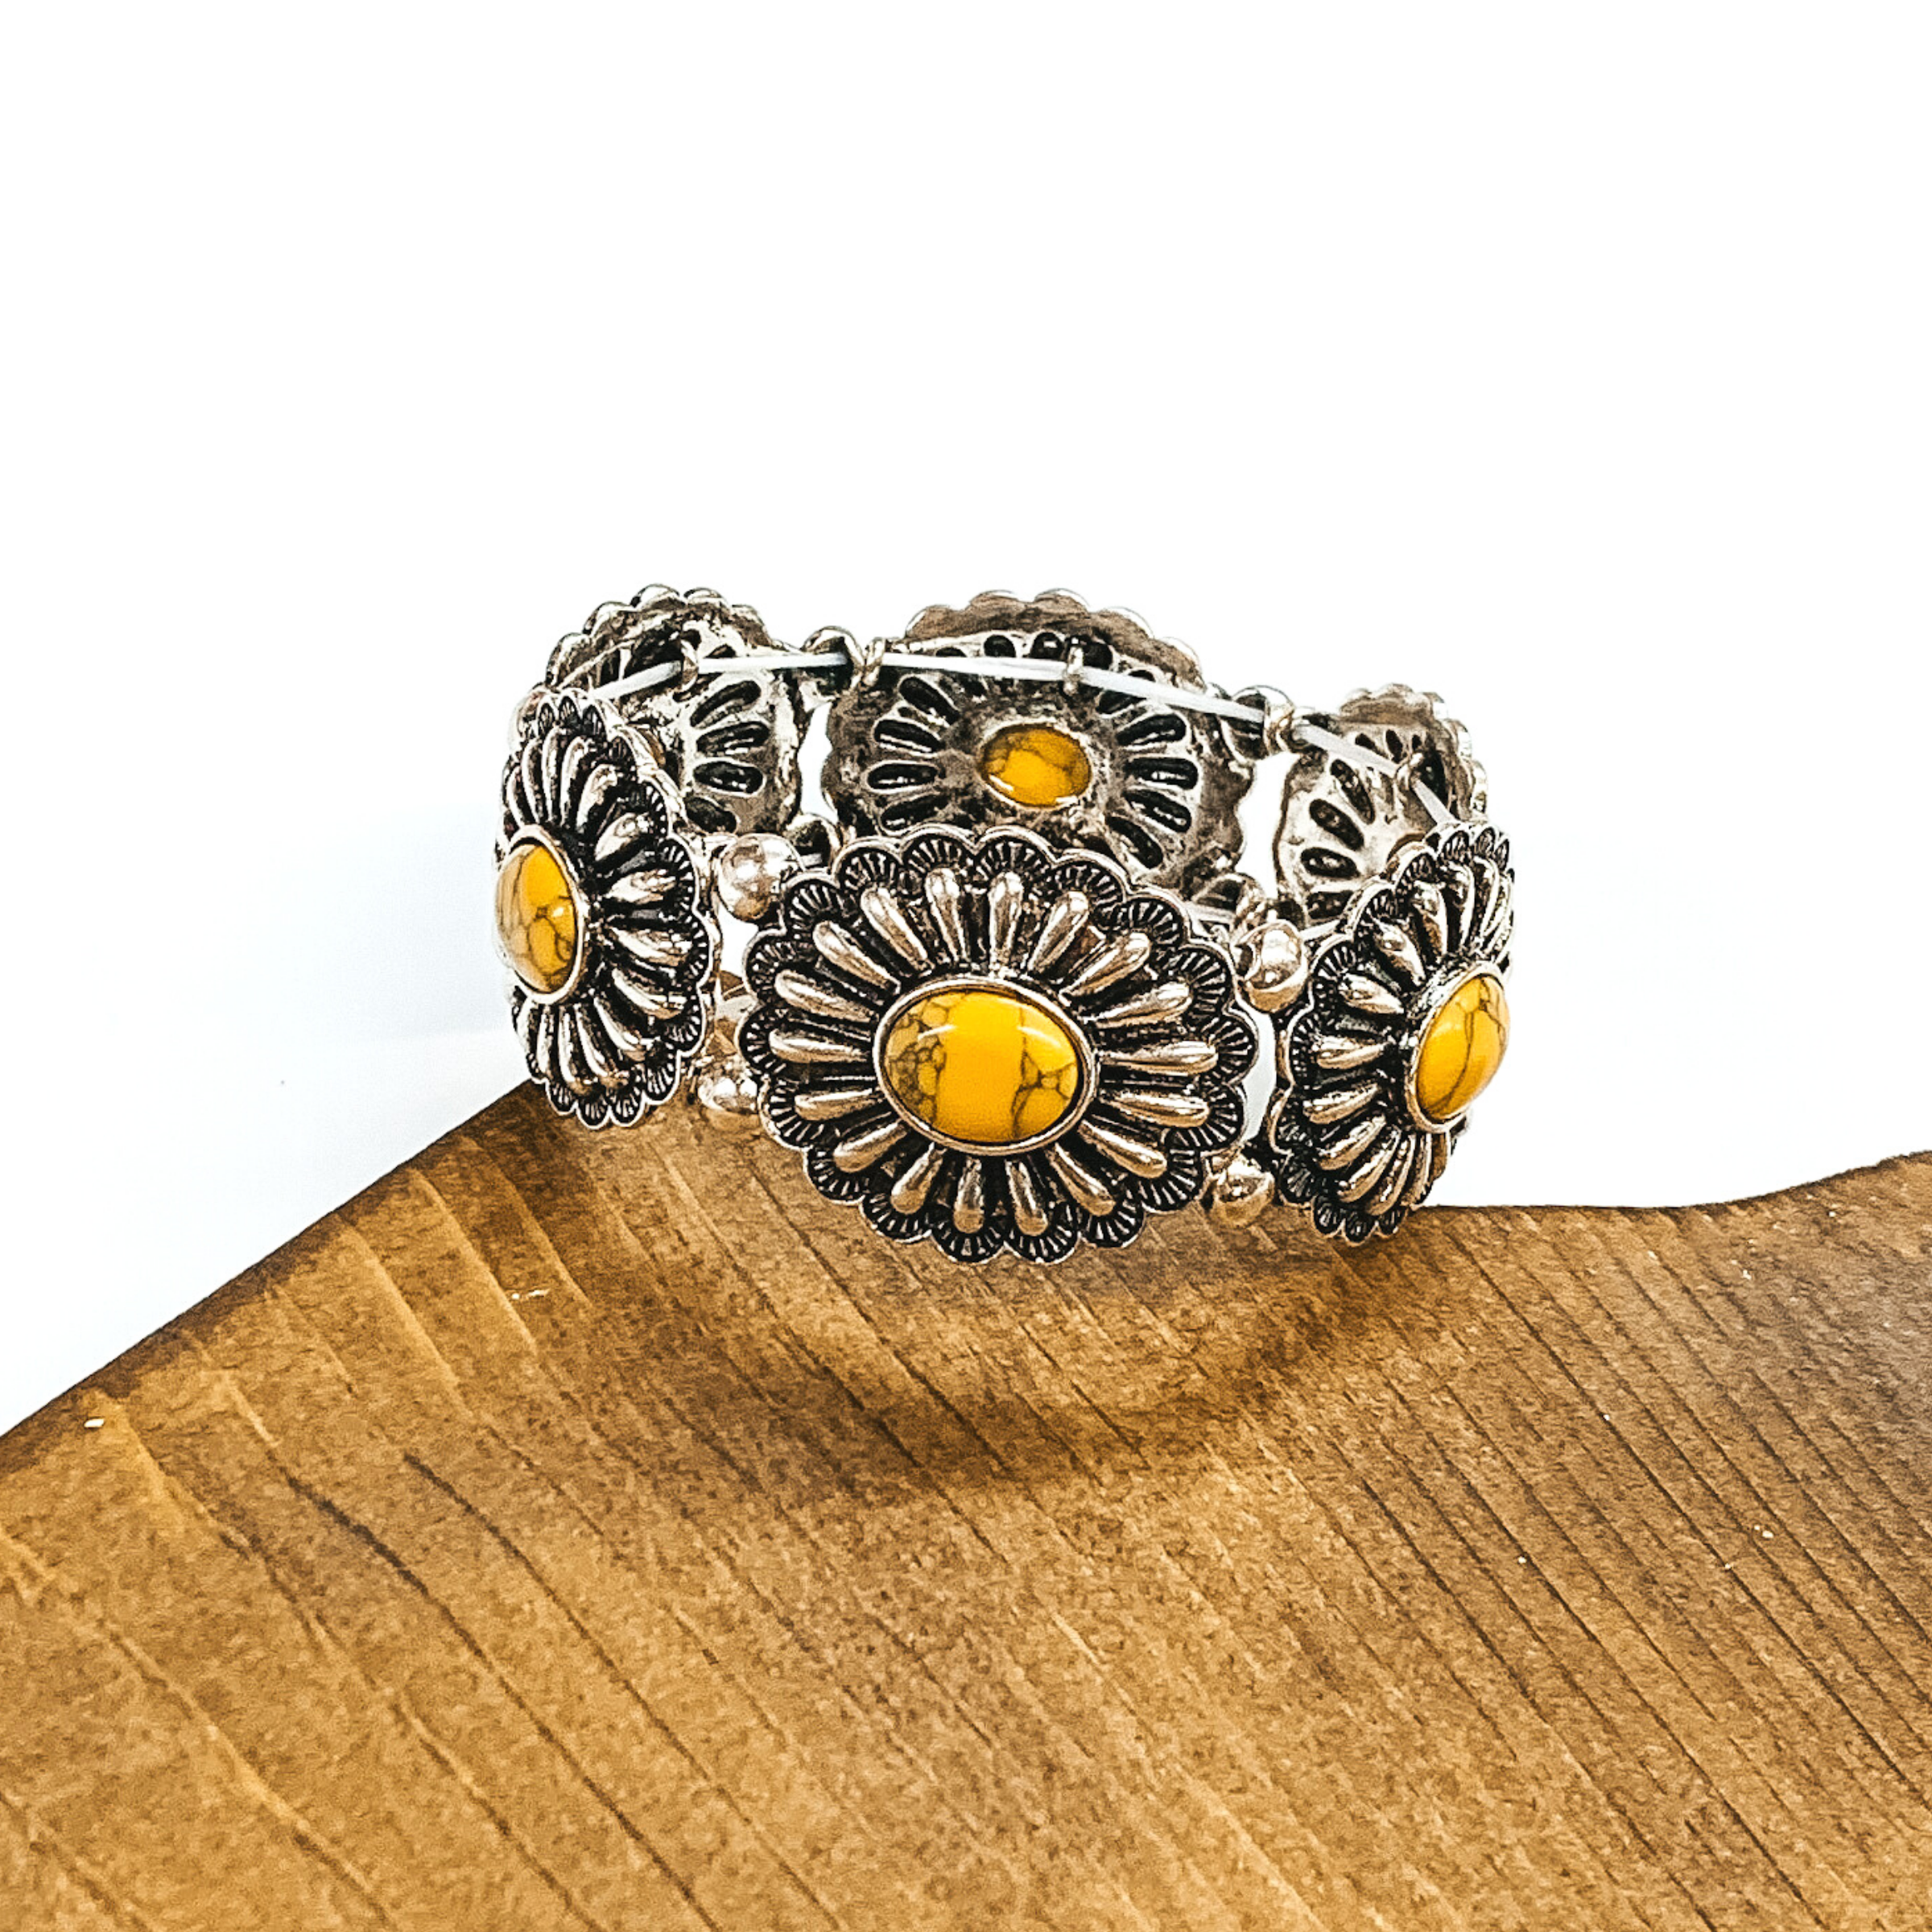 Silver, oval concho stretchy bracelet with oval center stones in yellow. This bracelet is pictured partially laying on a piece of wood and on a white background.